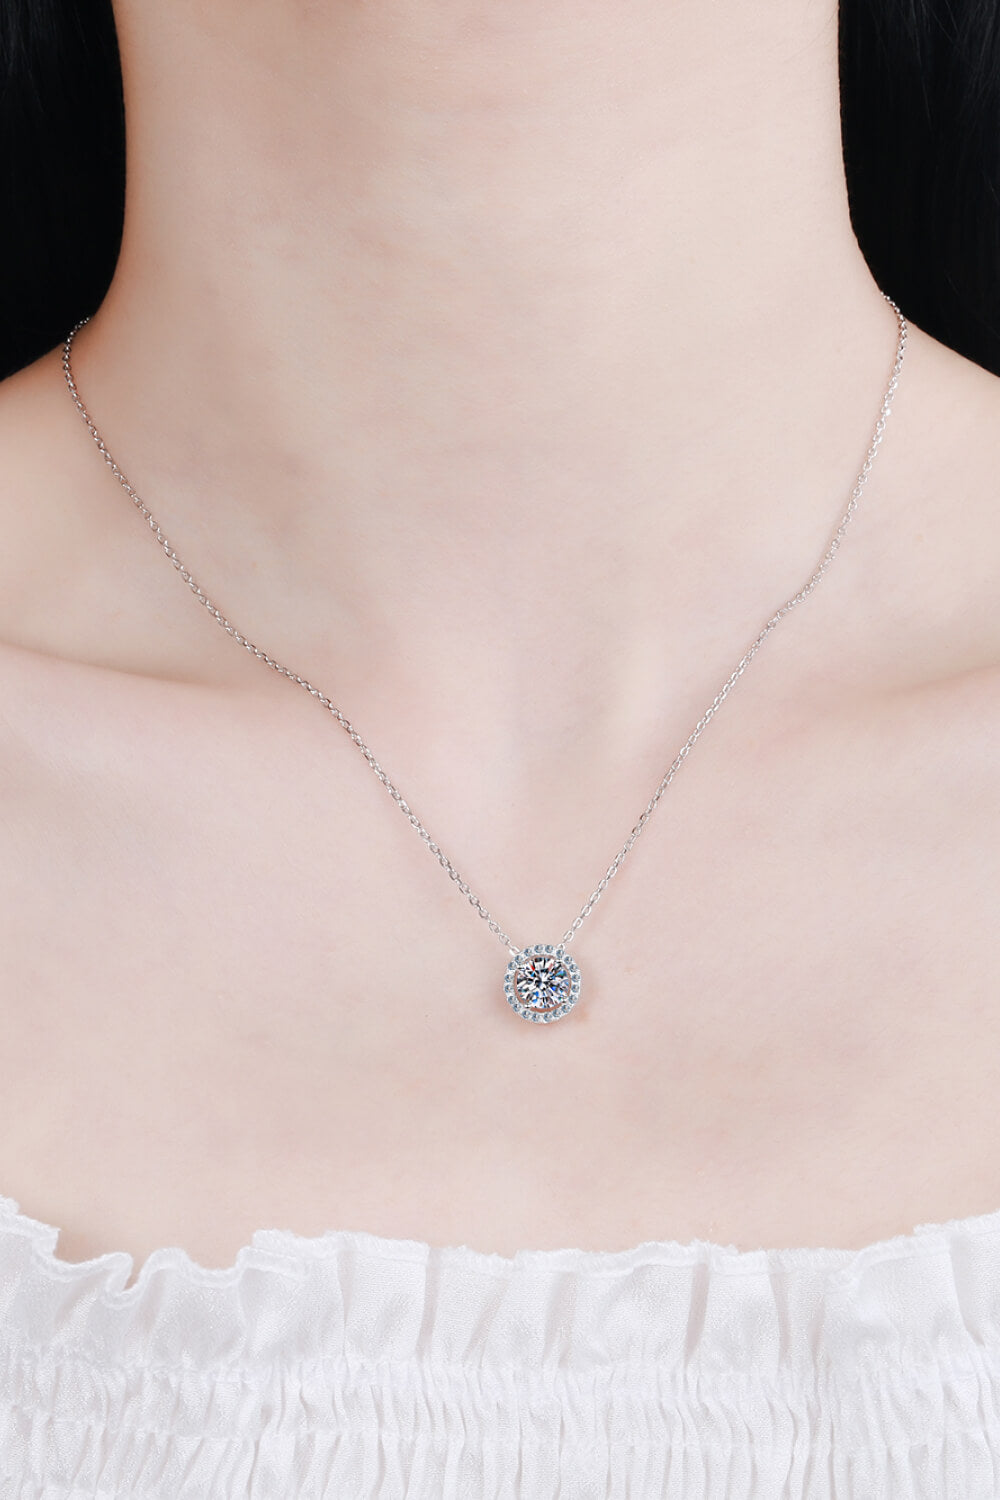 One Carat Moissanite Round Pendant Chain Necklace